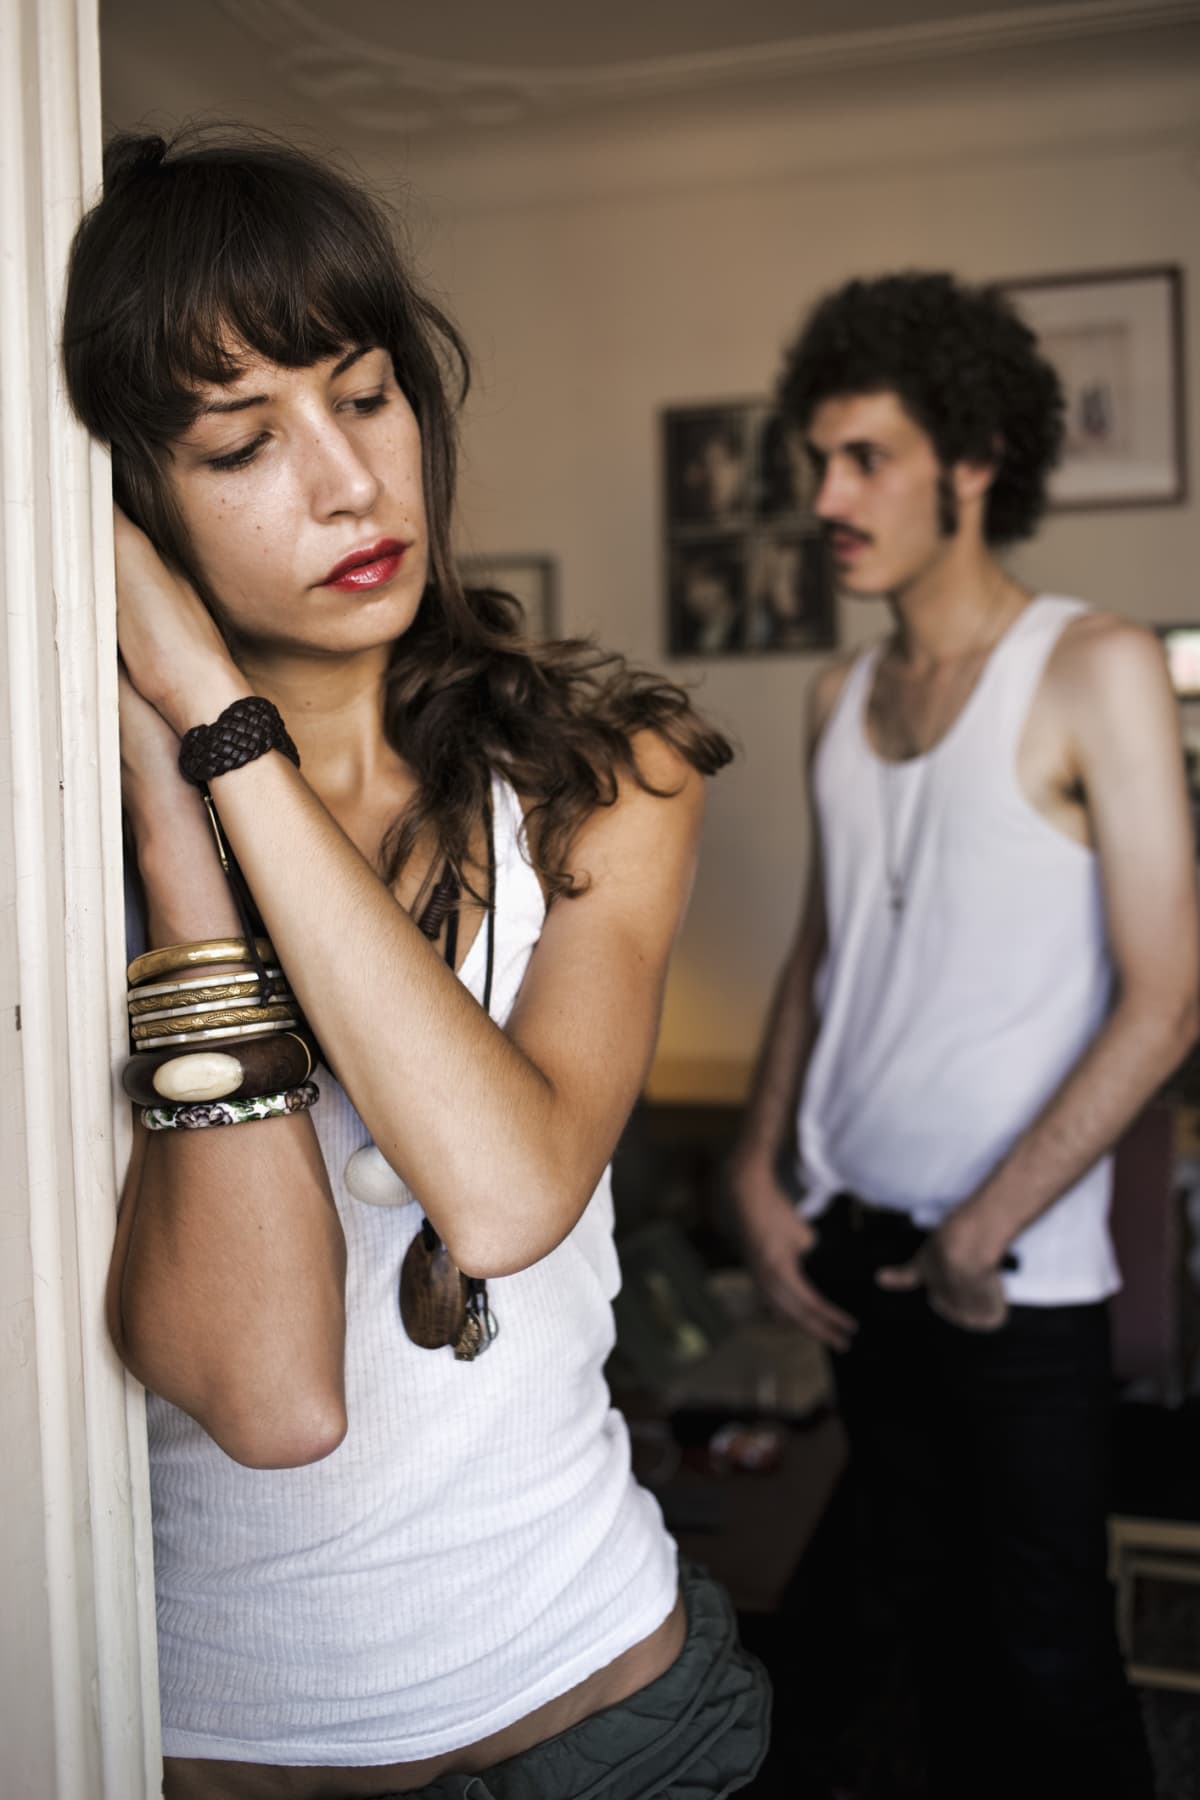 A woman leans on a doorframe looking downcast while a man in the background is looking somewhere else